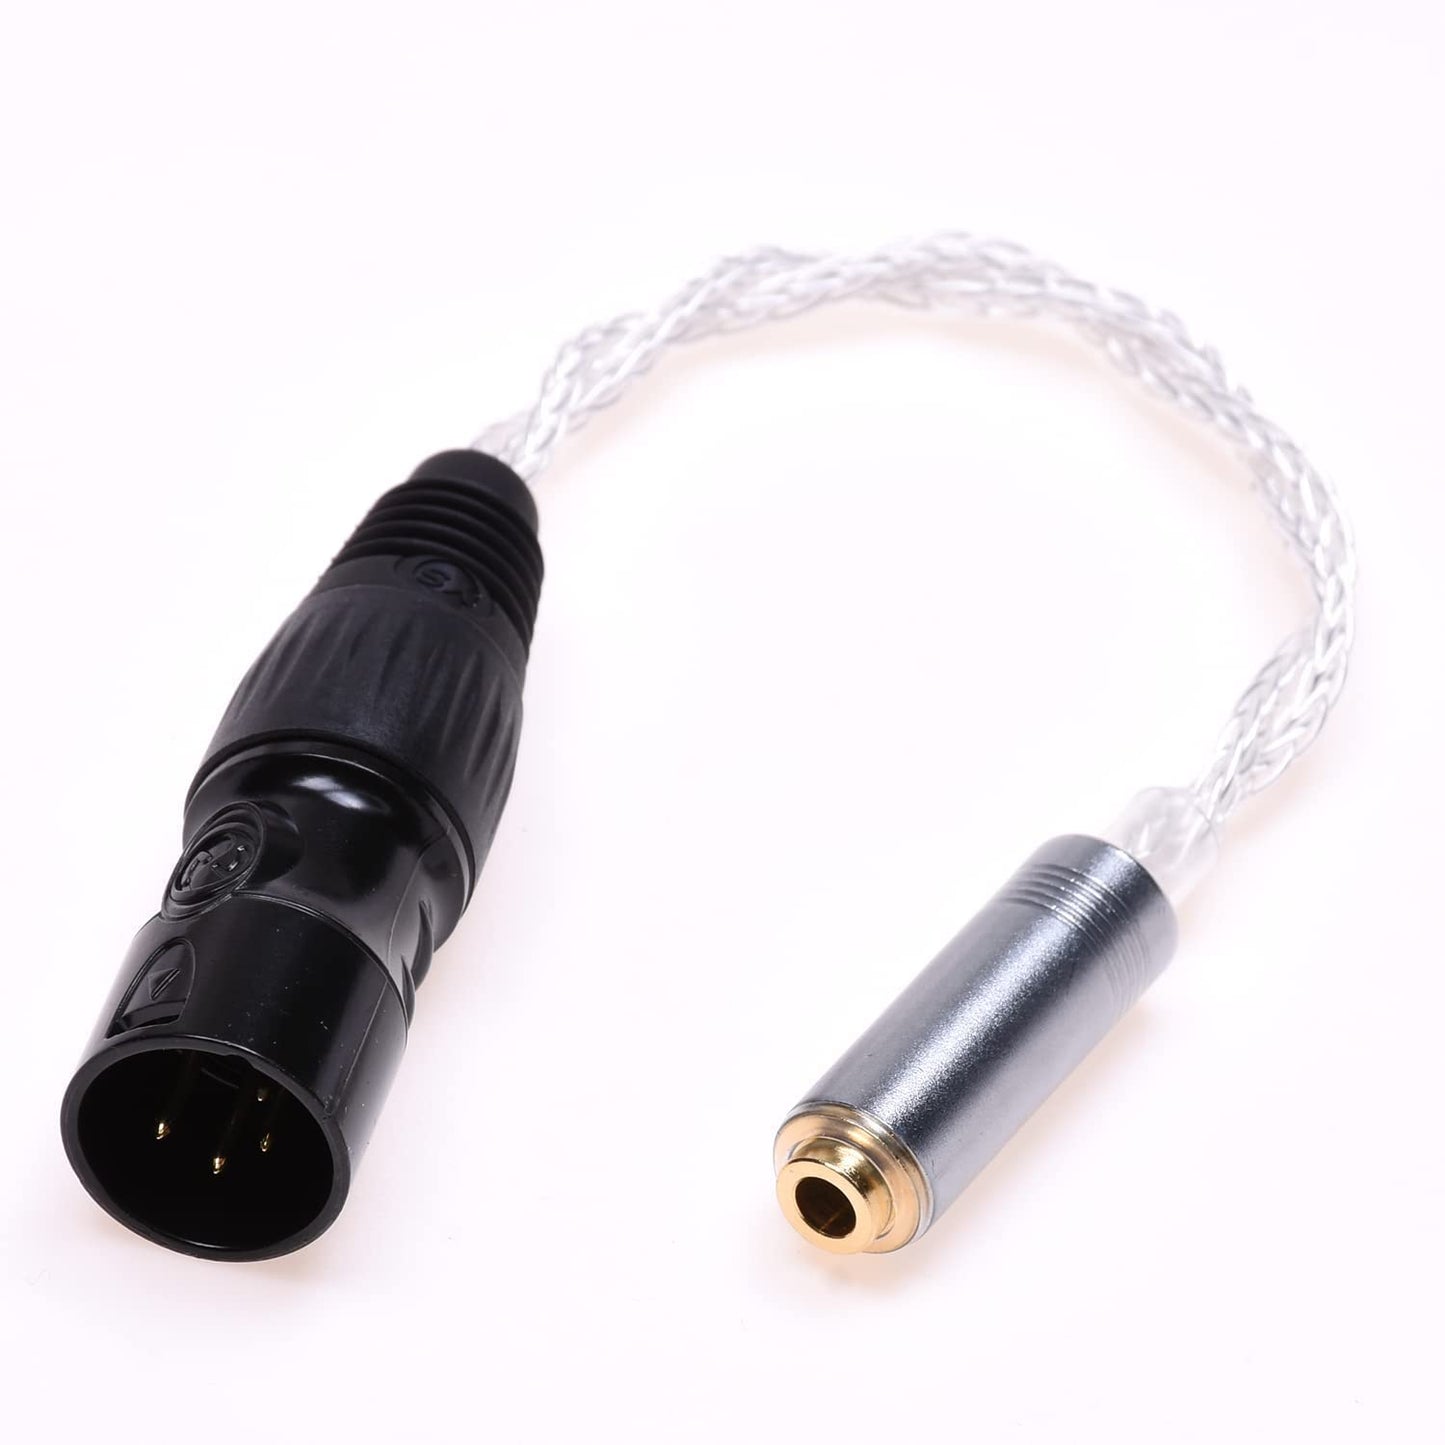 XLR Balanced 16 Cores Silver Plated Cable 4-pin XLR Male to 4.4mm Female Balanced Audio Adapter for Sony NW-WM1Z 1A MDR-Z1R TA-ZH1ES PHA-2